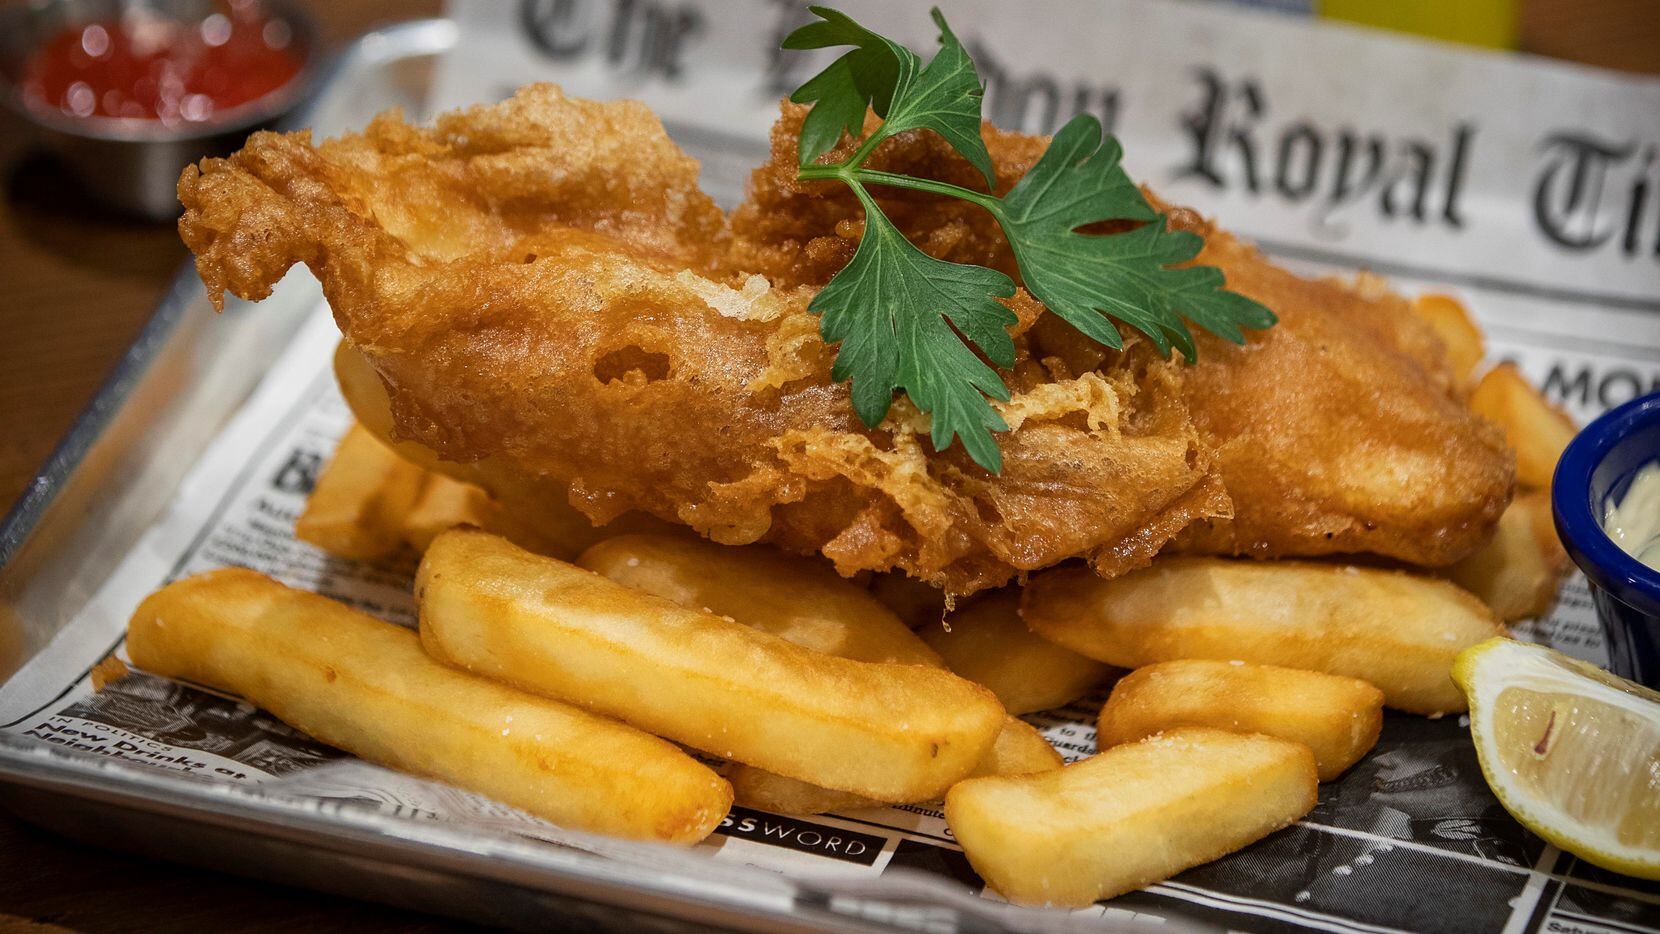 The house favorite fish and chips is the most popular item on the menu at Fish and Fizz.